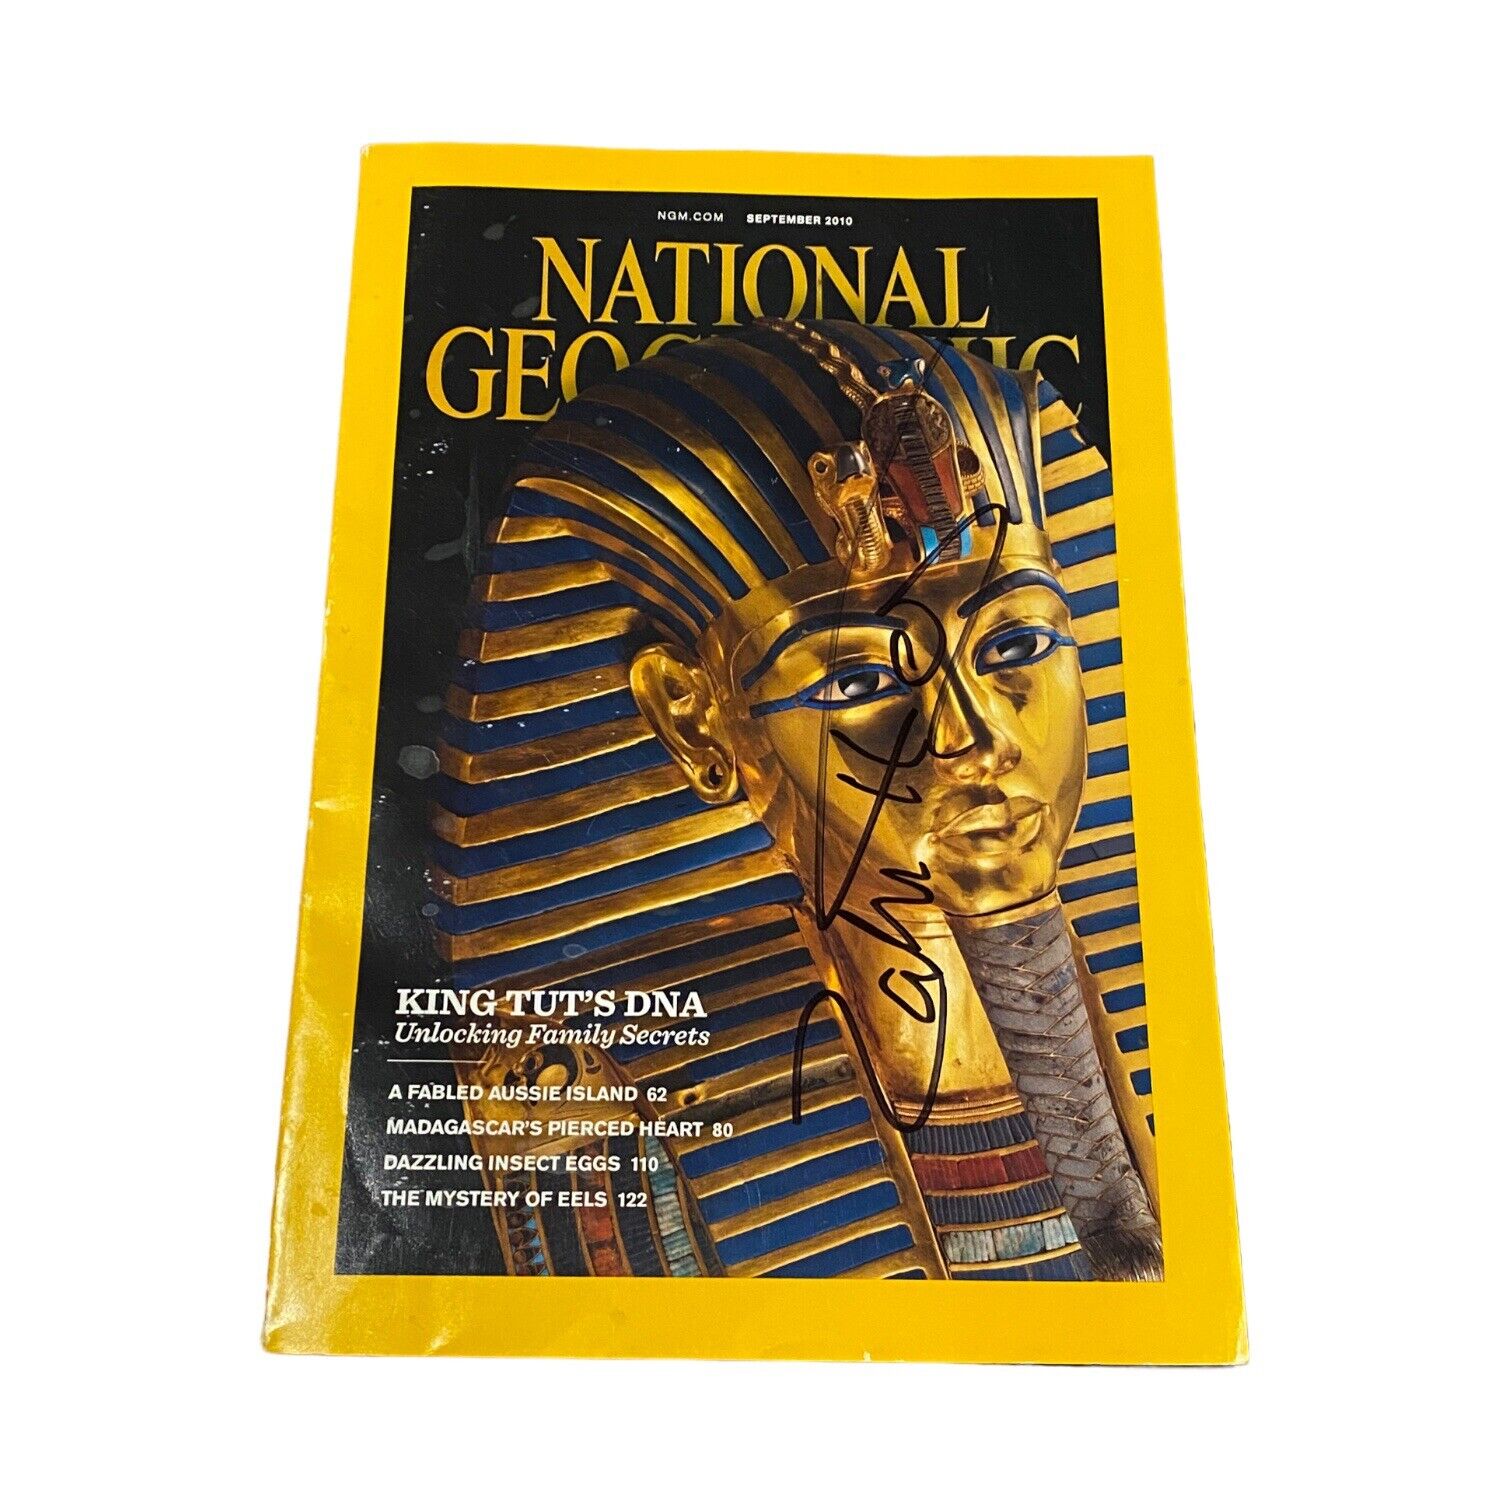 Zahi Hawass Signed Autograph Sept. 2010 National Geographic Featuring King Tut